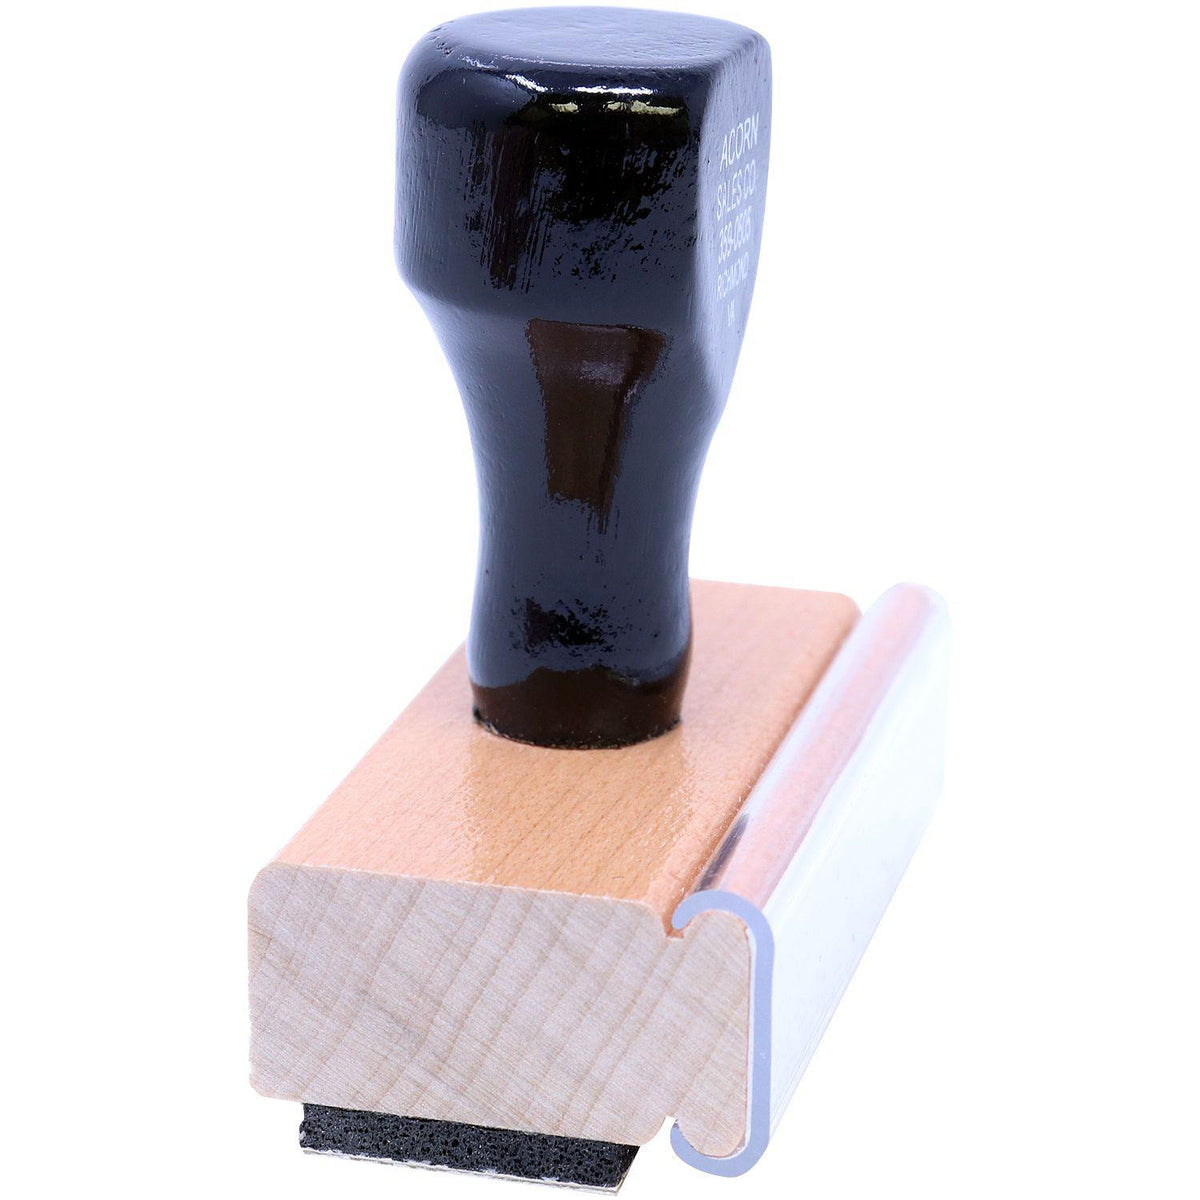 Side View of Hippa Medical Rubber Stamp at an Angle